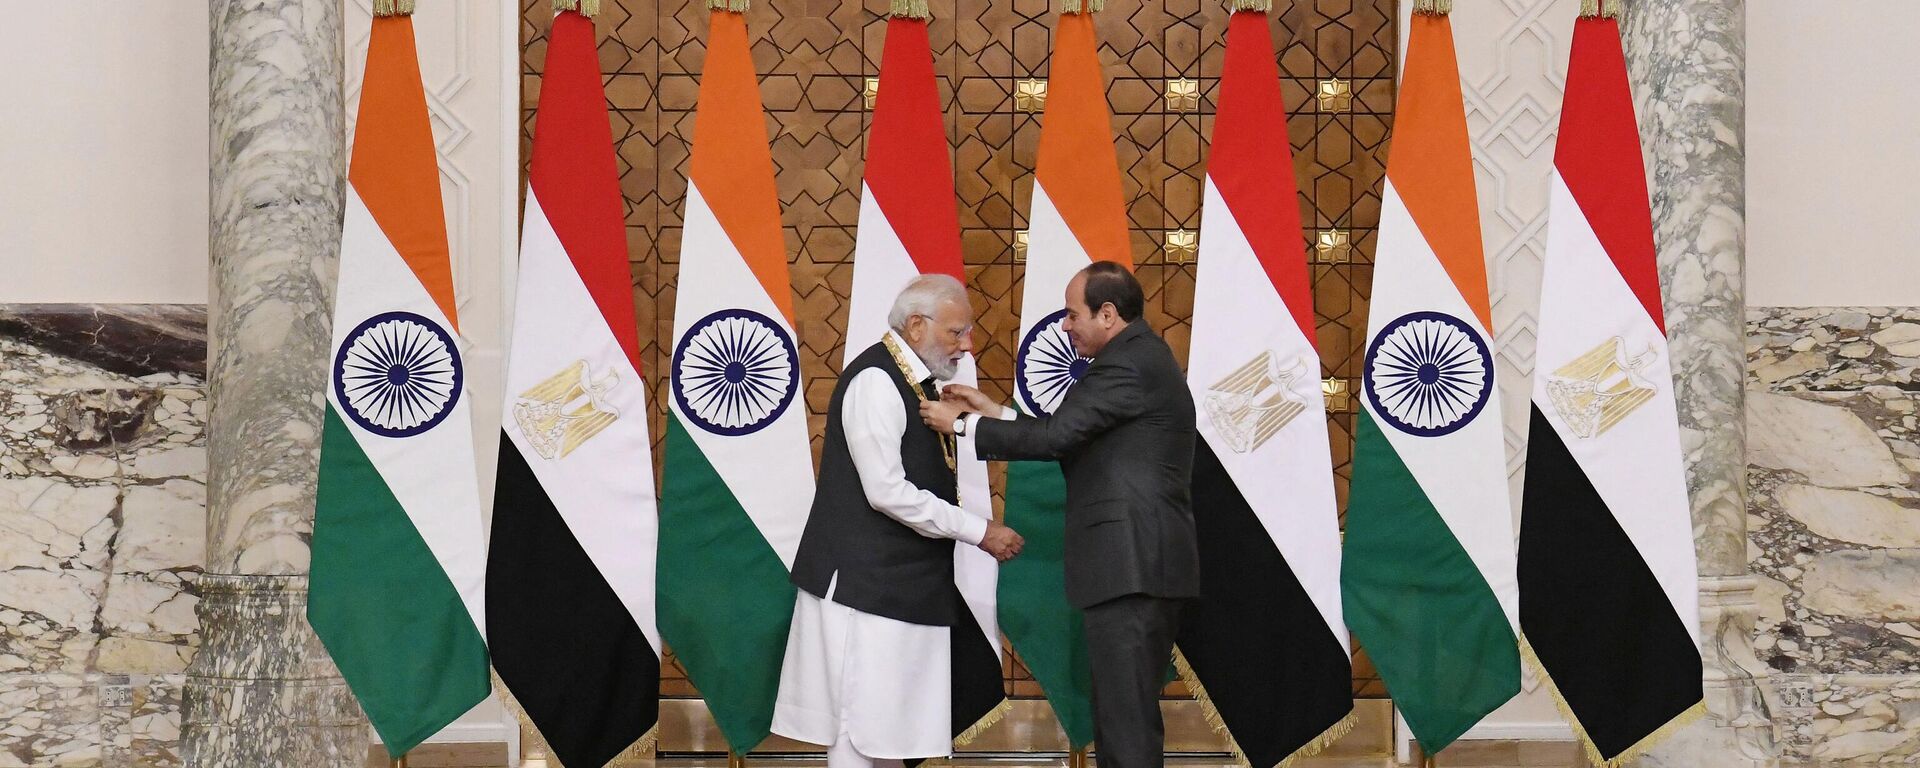 A handout picture released by the Egyptian Presidency on June 25, 2023 shows Egyptian president Abdel Fattah el-Sisi (R) granting the Order of the Nile medal to the Indian Prime Minister Narendra Modi in the capital Cairo. - Sputnik India, 1920, 25.06.2023